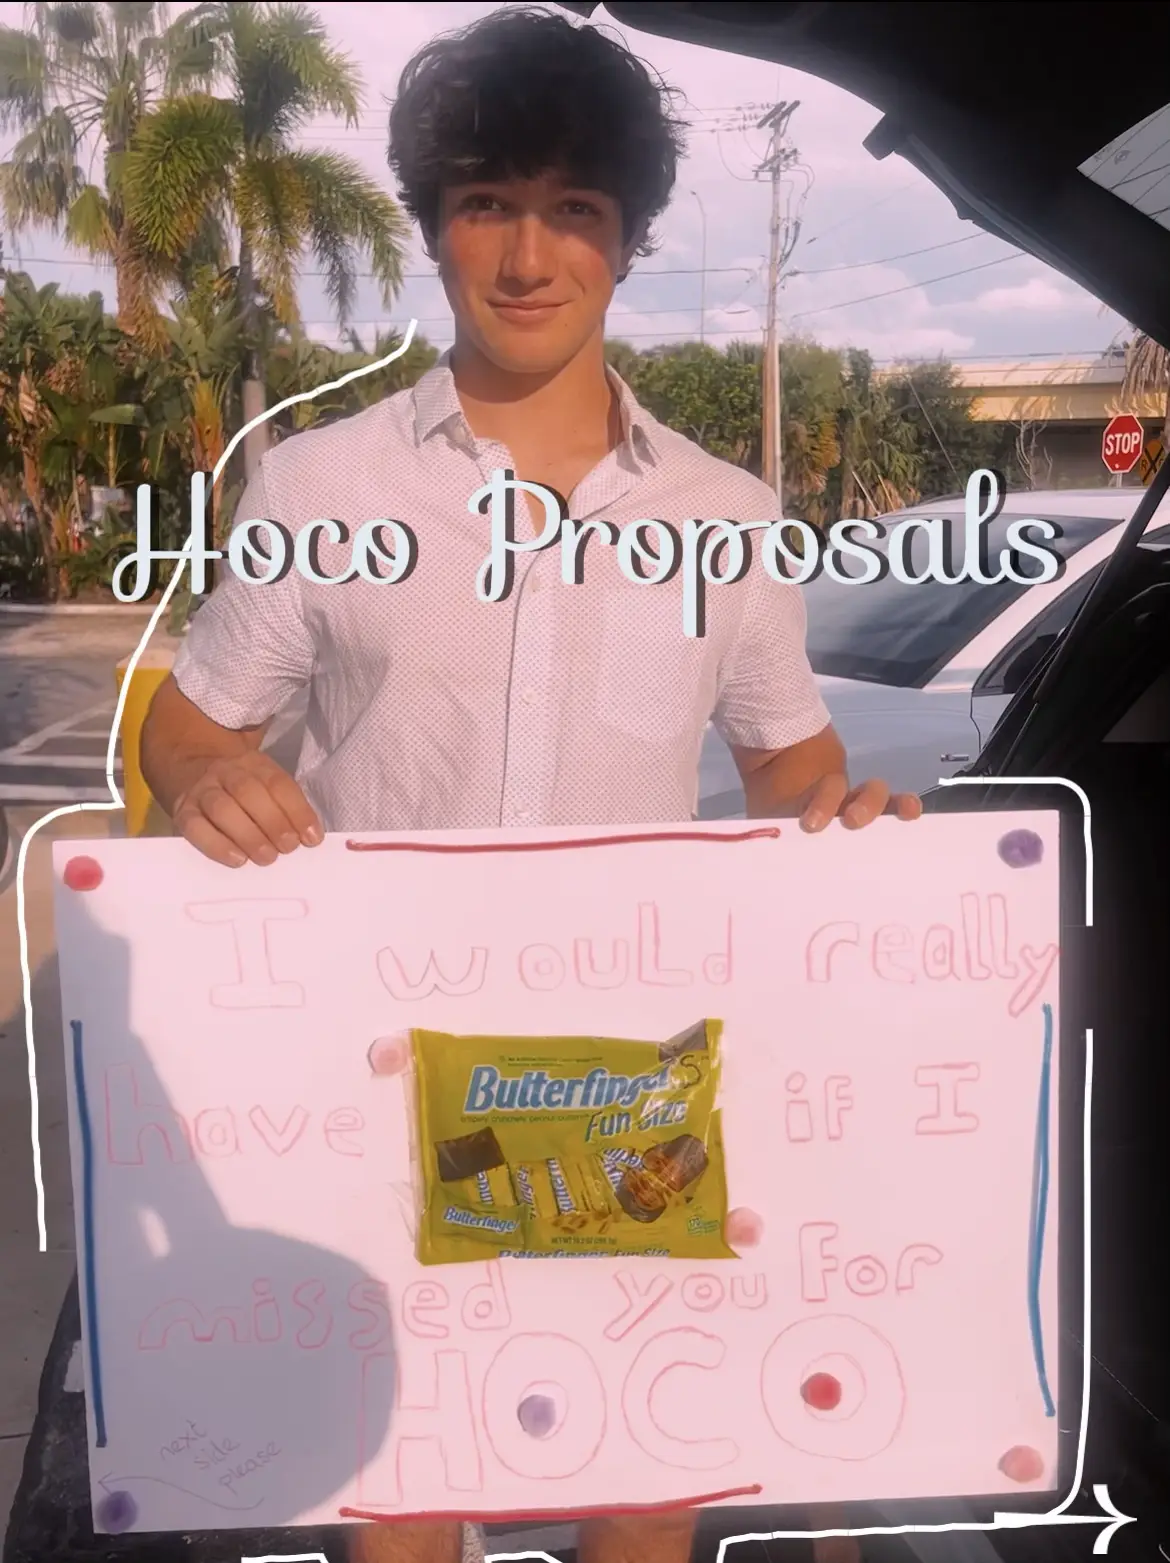 Promposal Ideas with Acts - Lemon8 Search